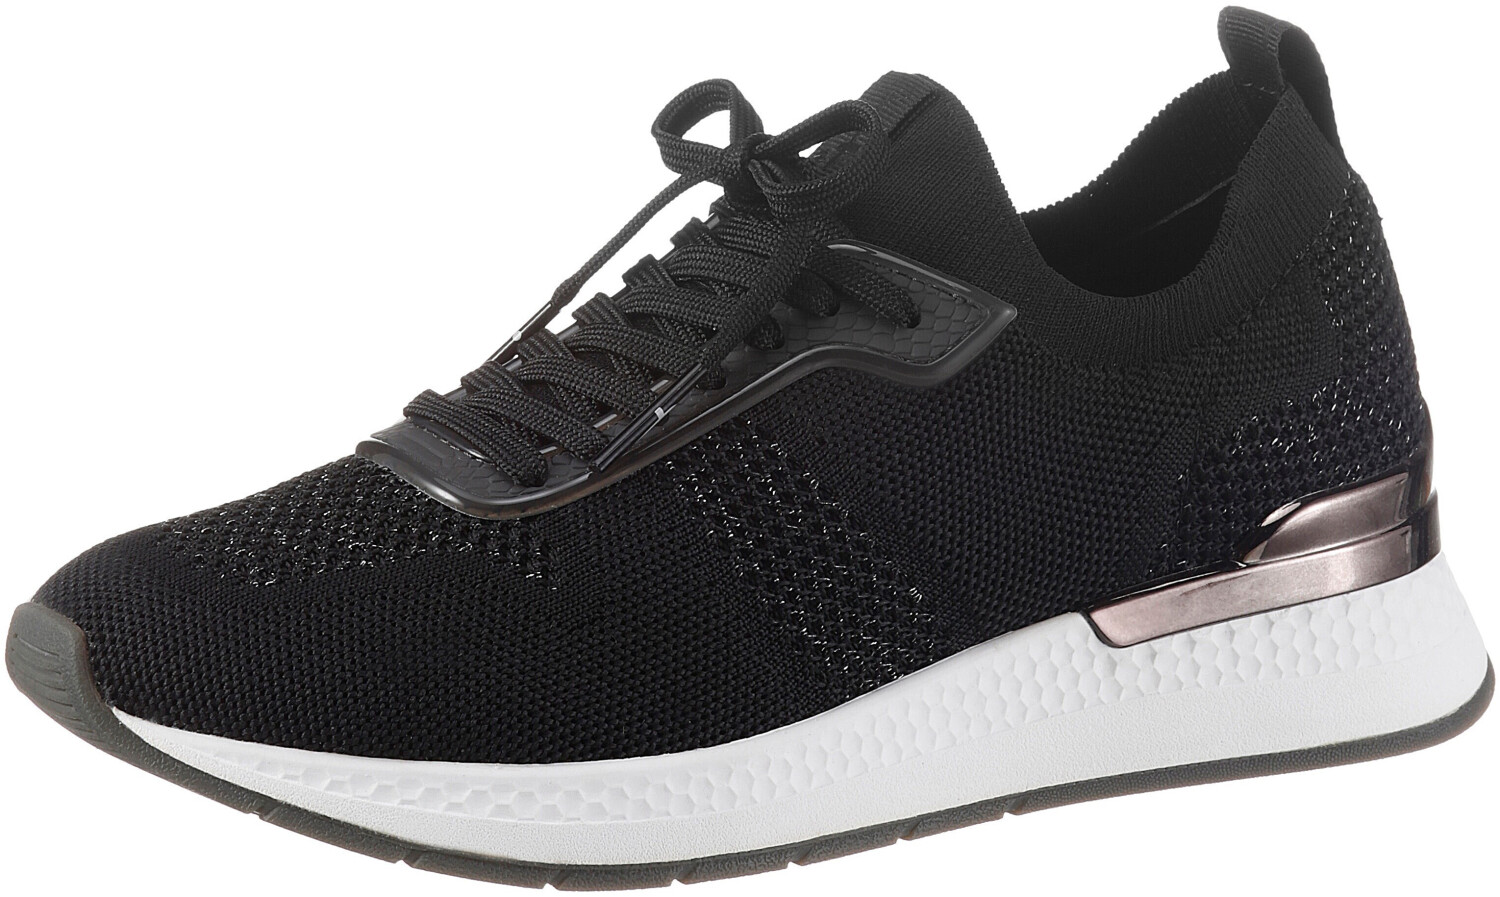 Buy Tamaris Trainers (1-1-23712-26) black/pewter from £57.27 (Today ...